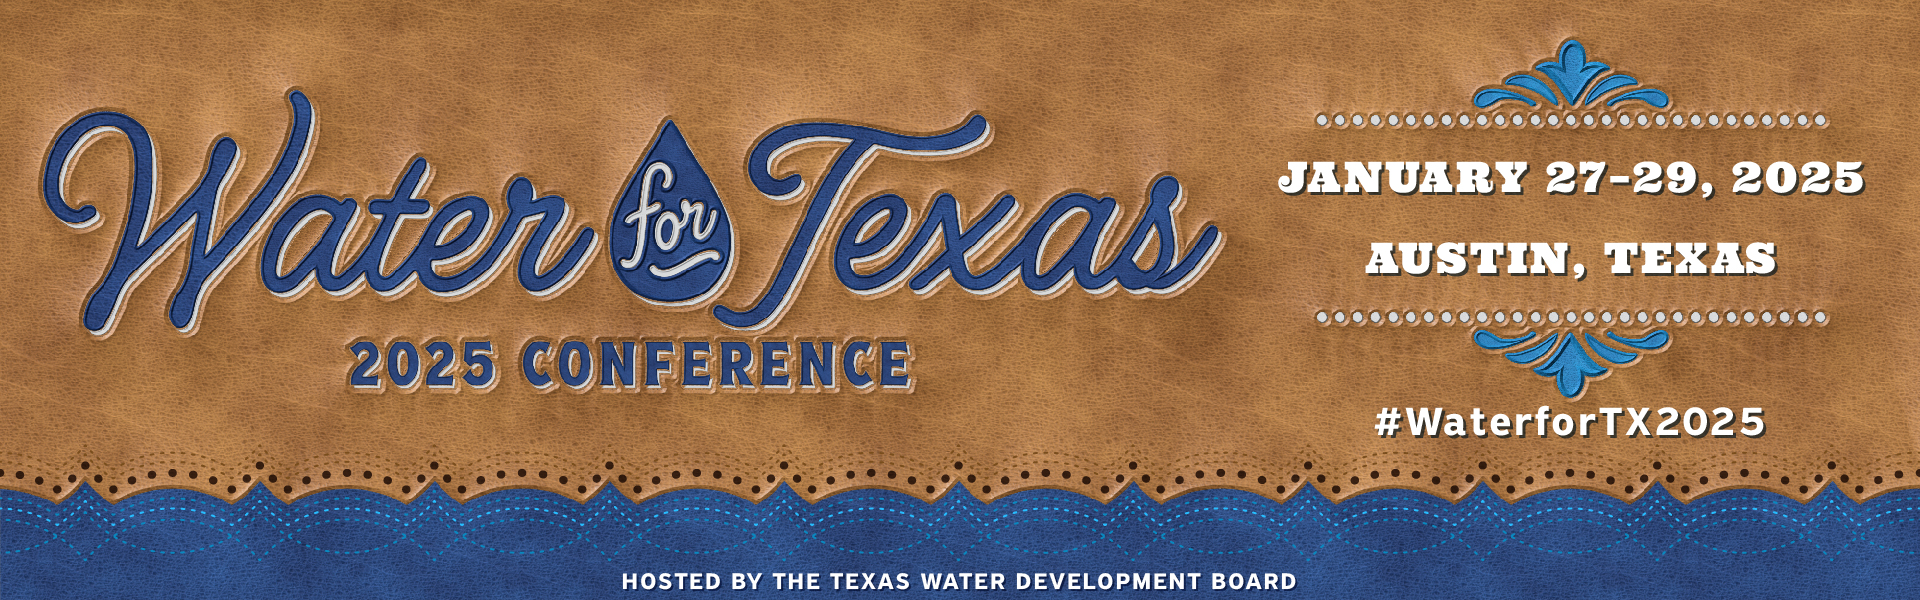 Water for Texas 2025 Conference